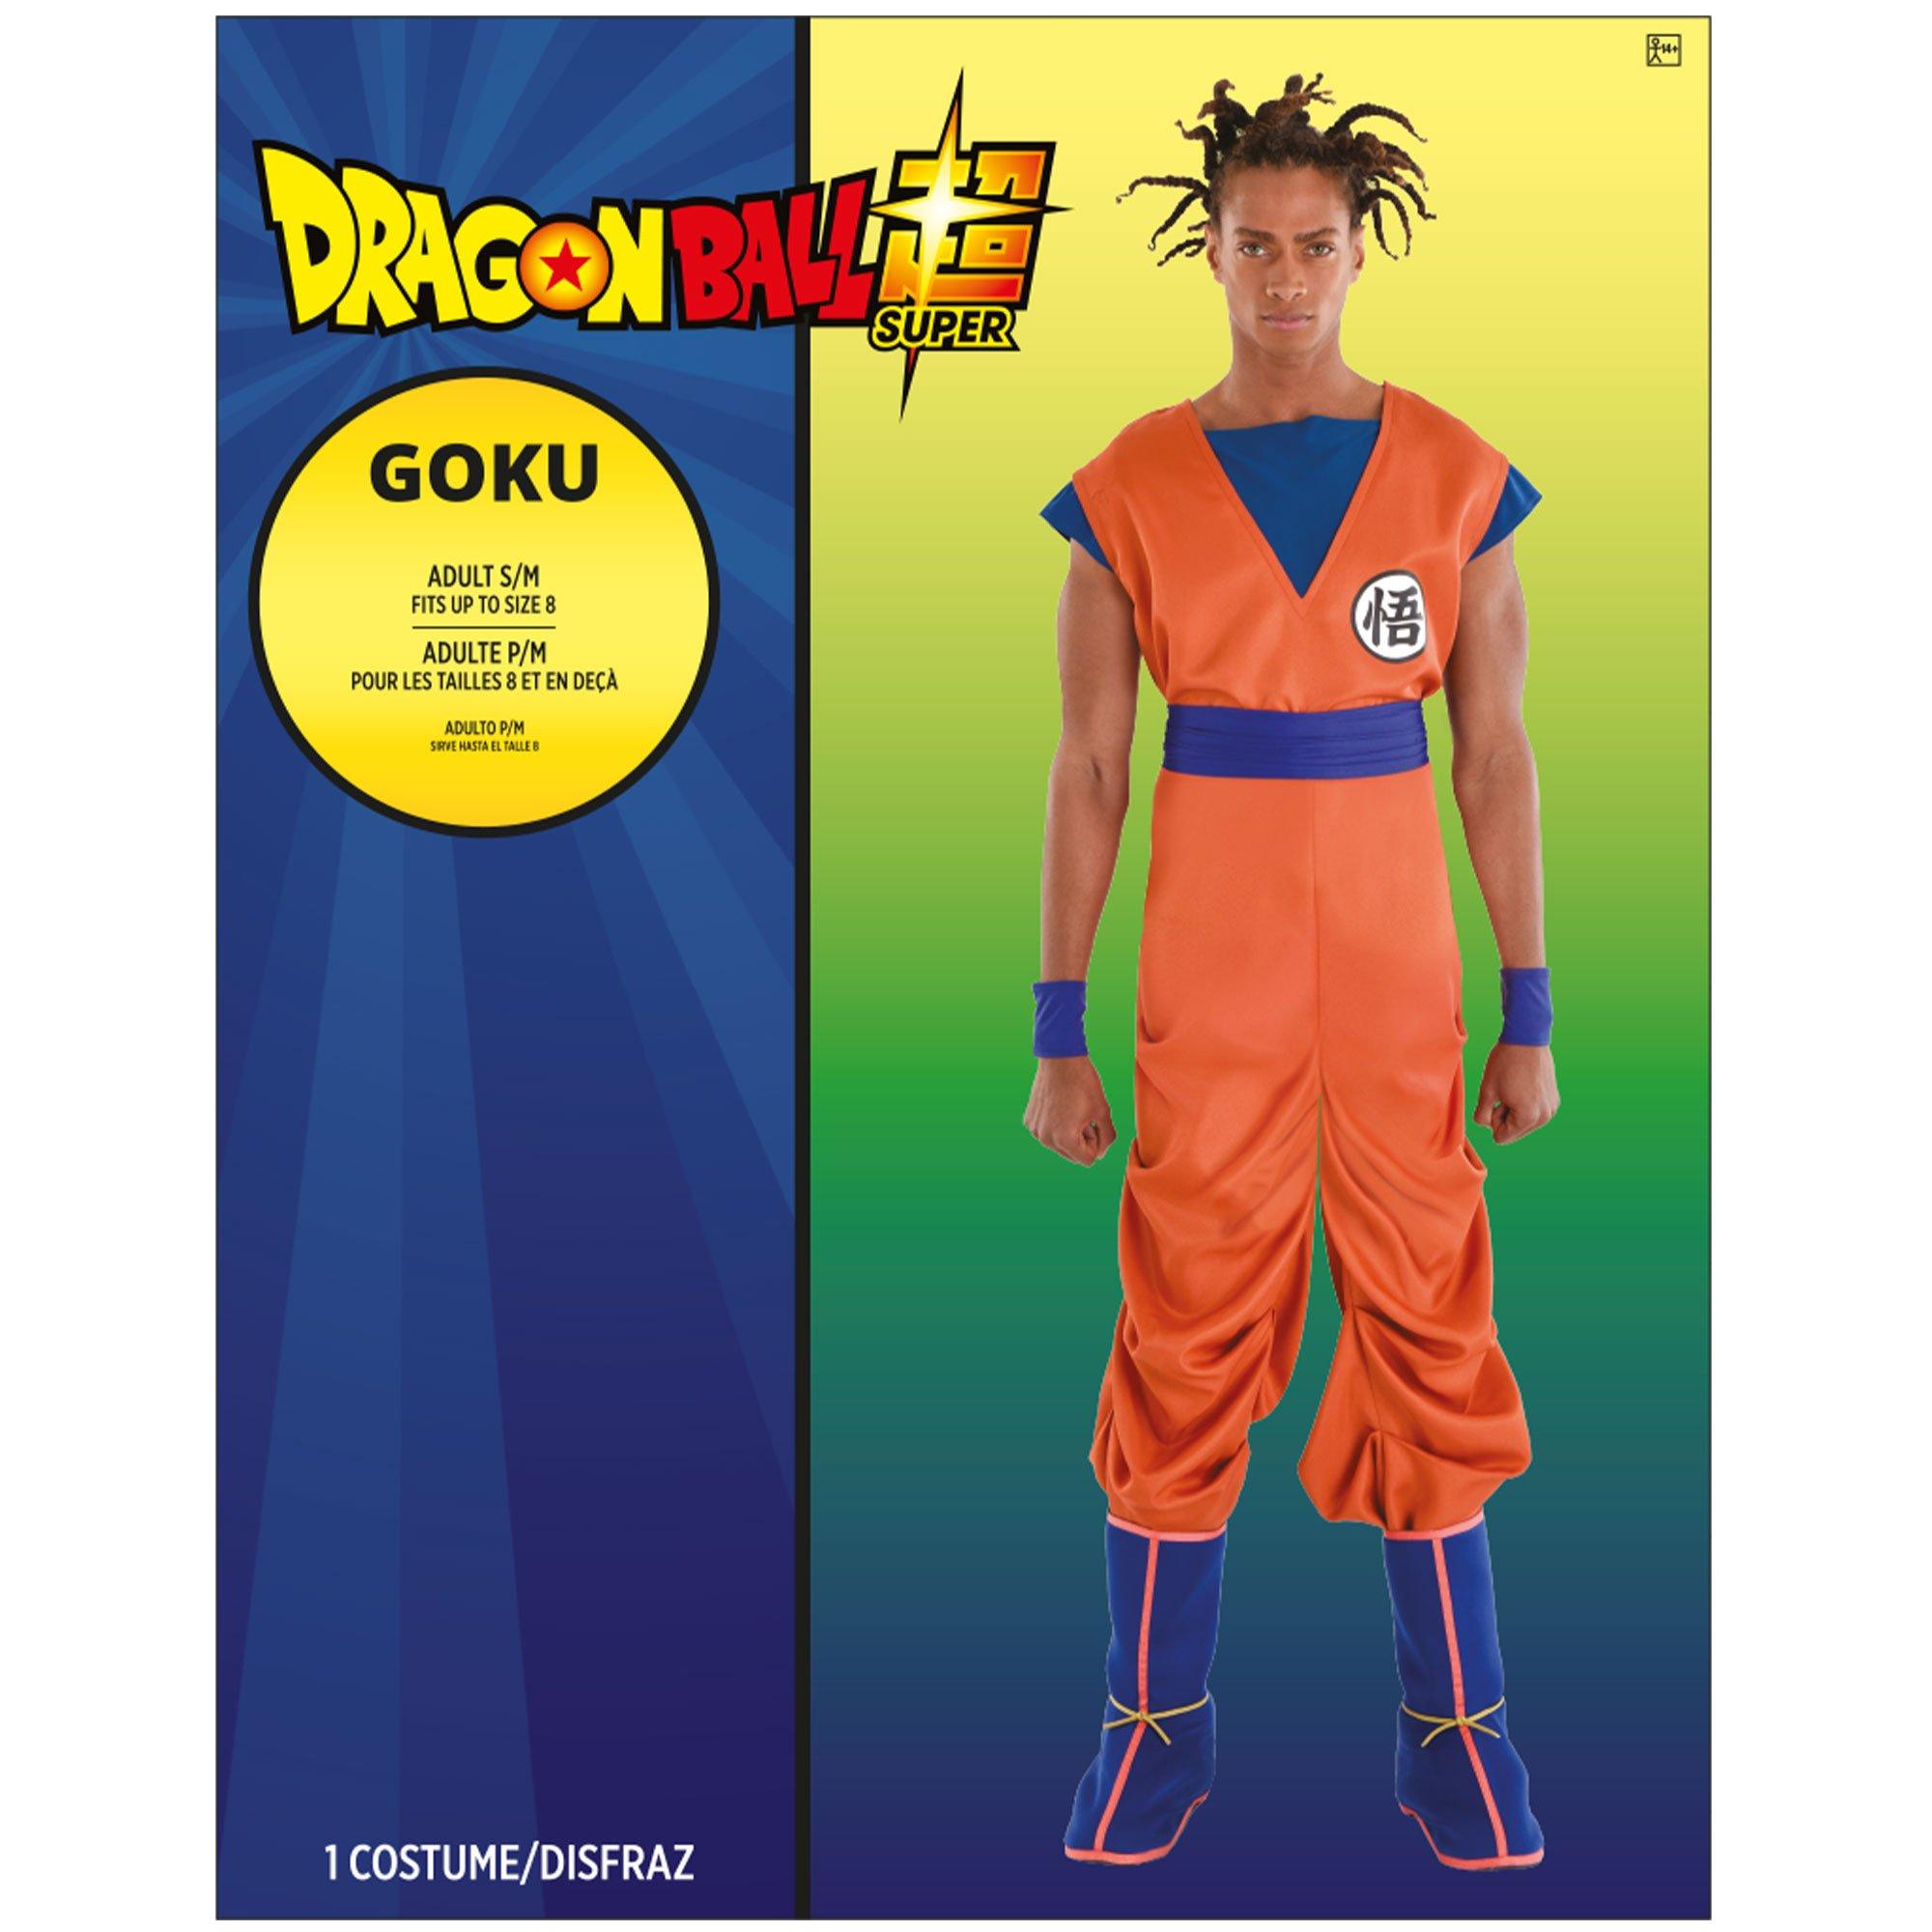 DRAGON BALL DRESS UP free online game on